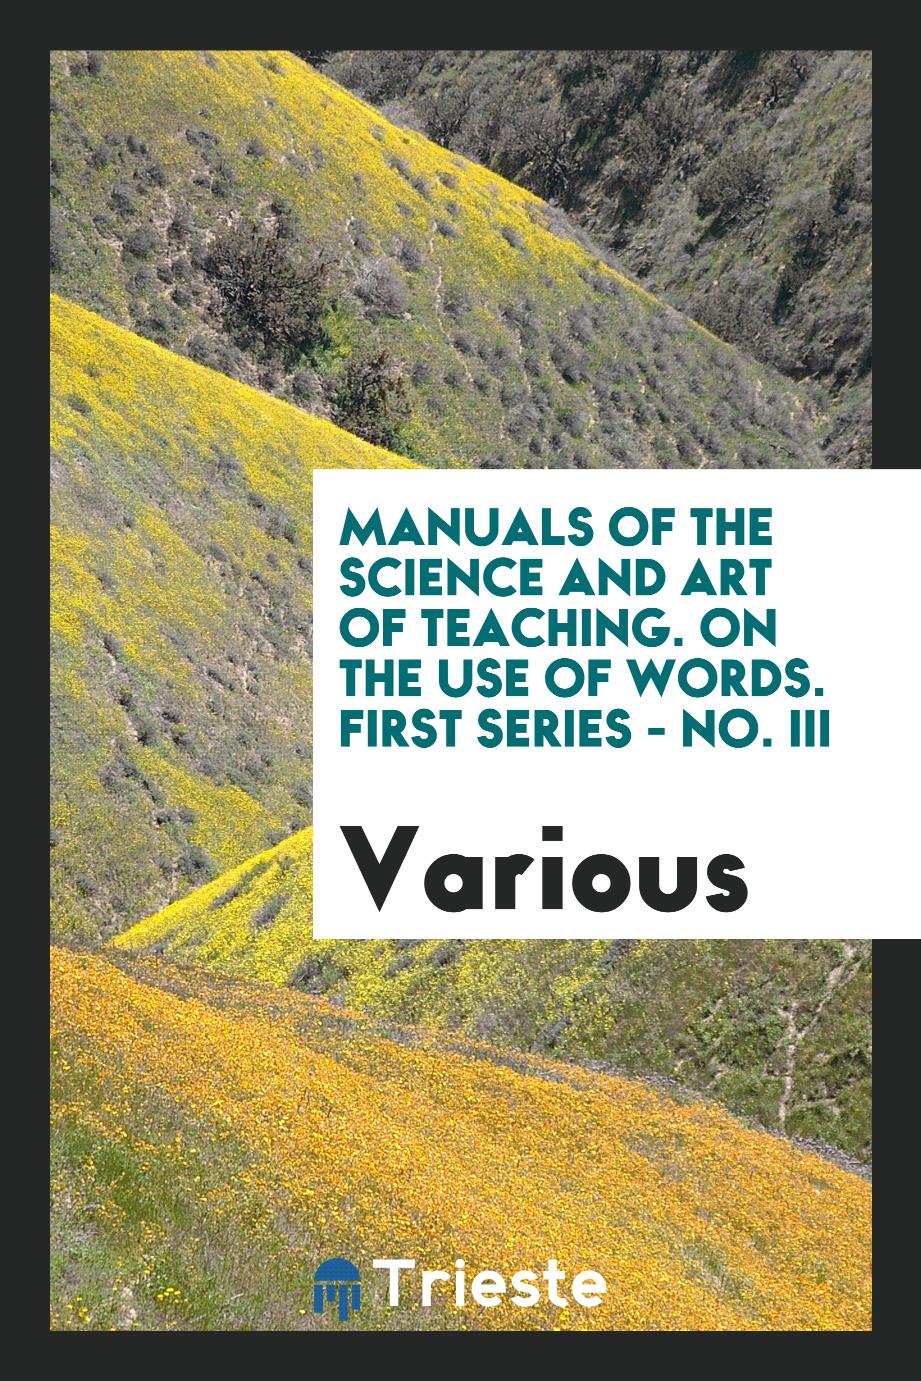 Manuals of the science and art of teaching. On the Use of Words. First Series - No. III